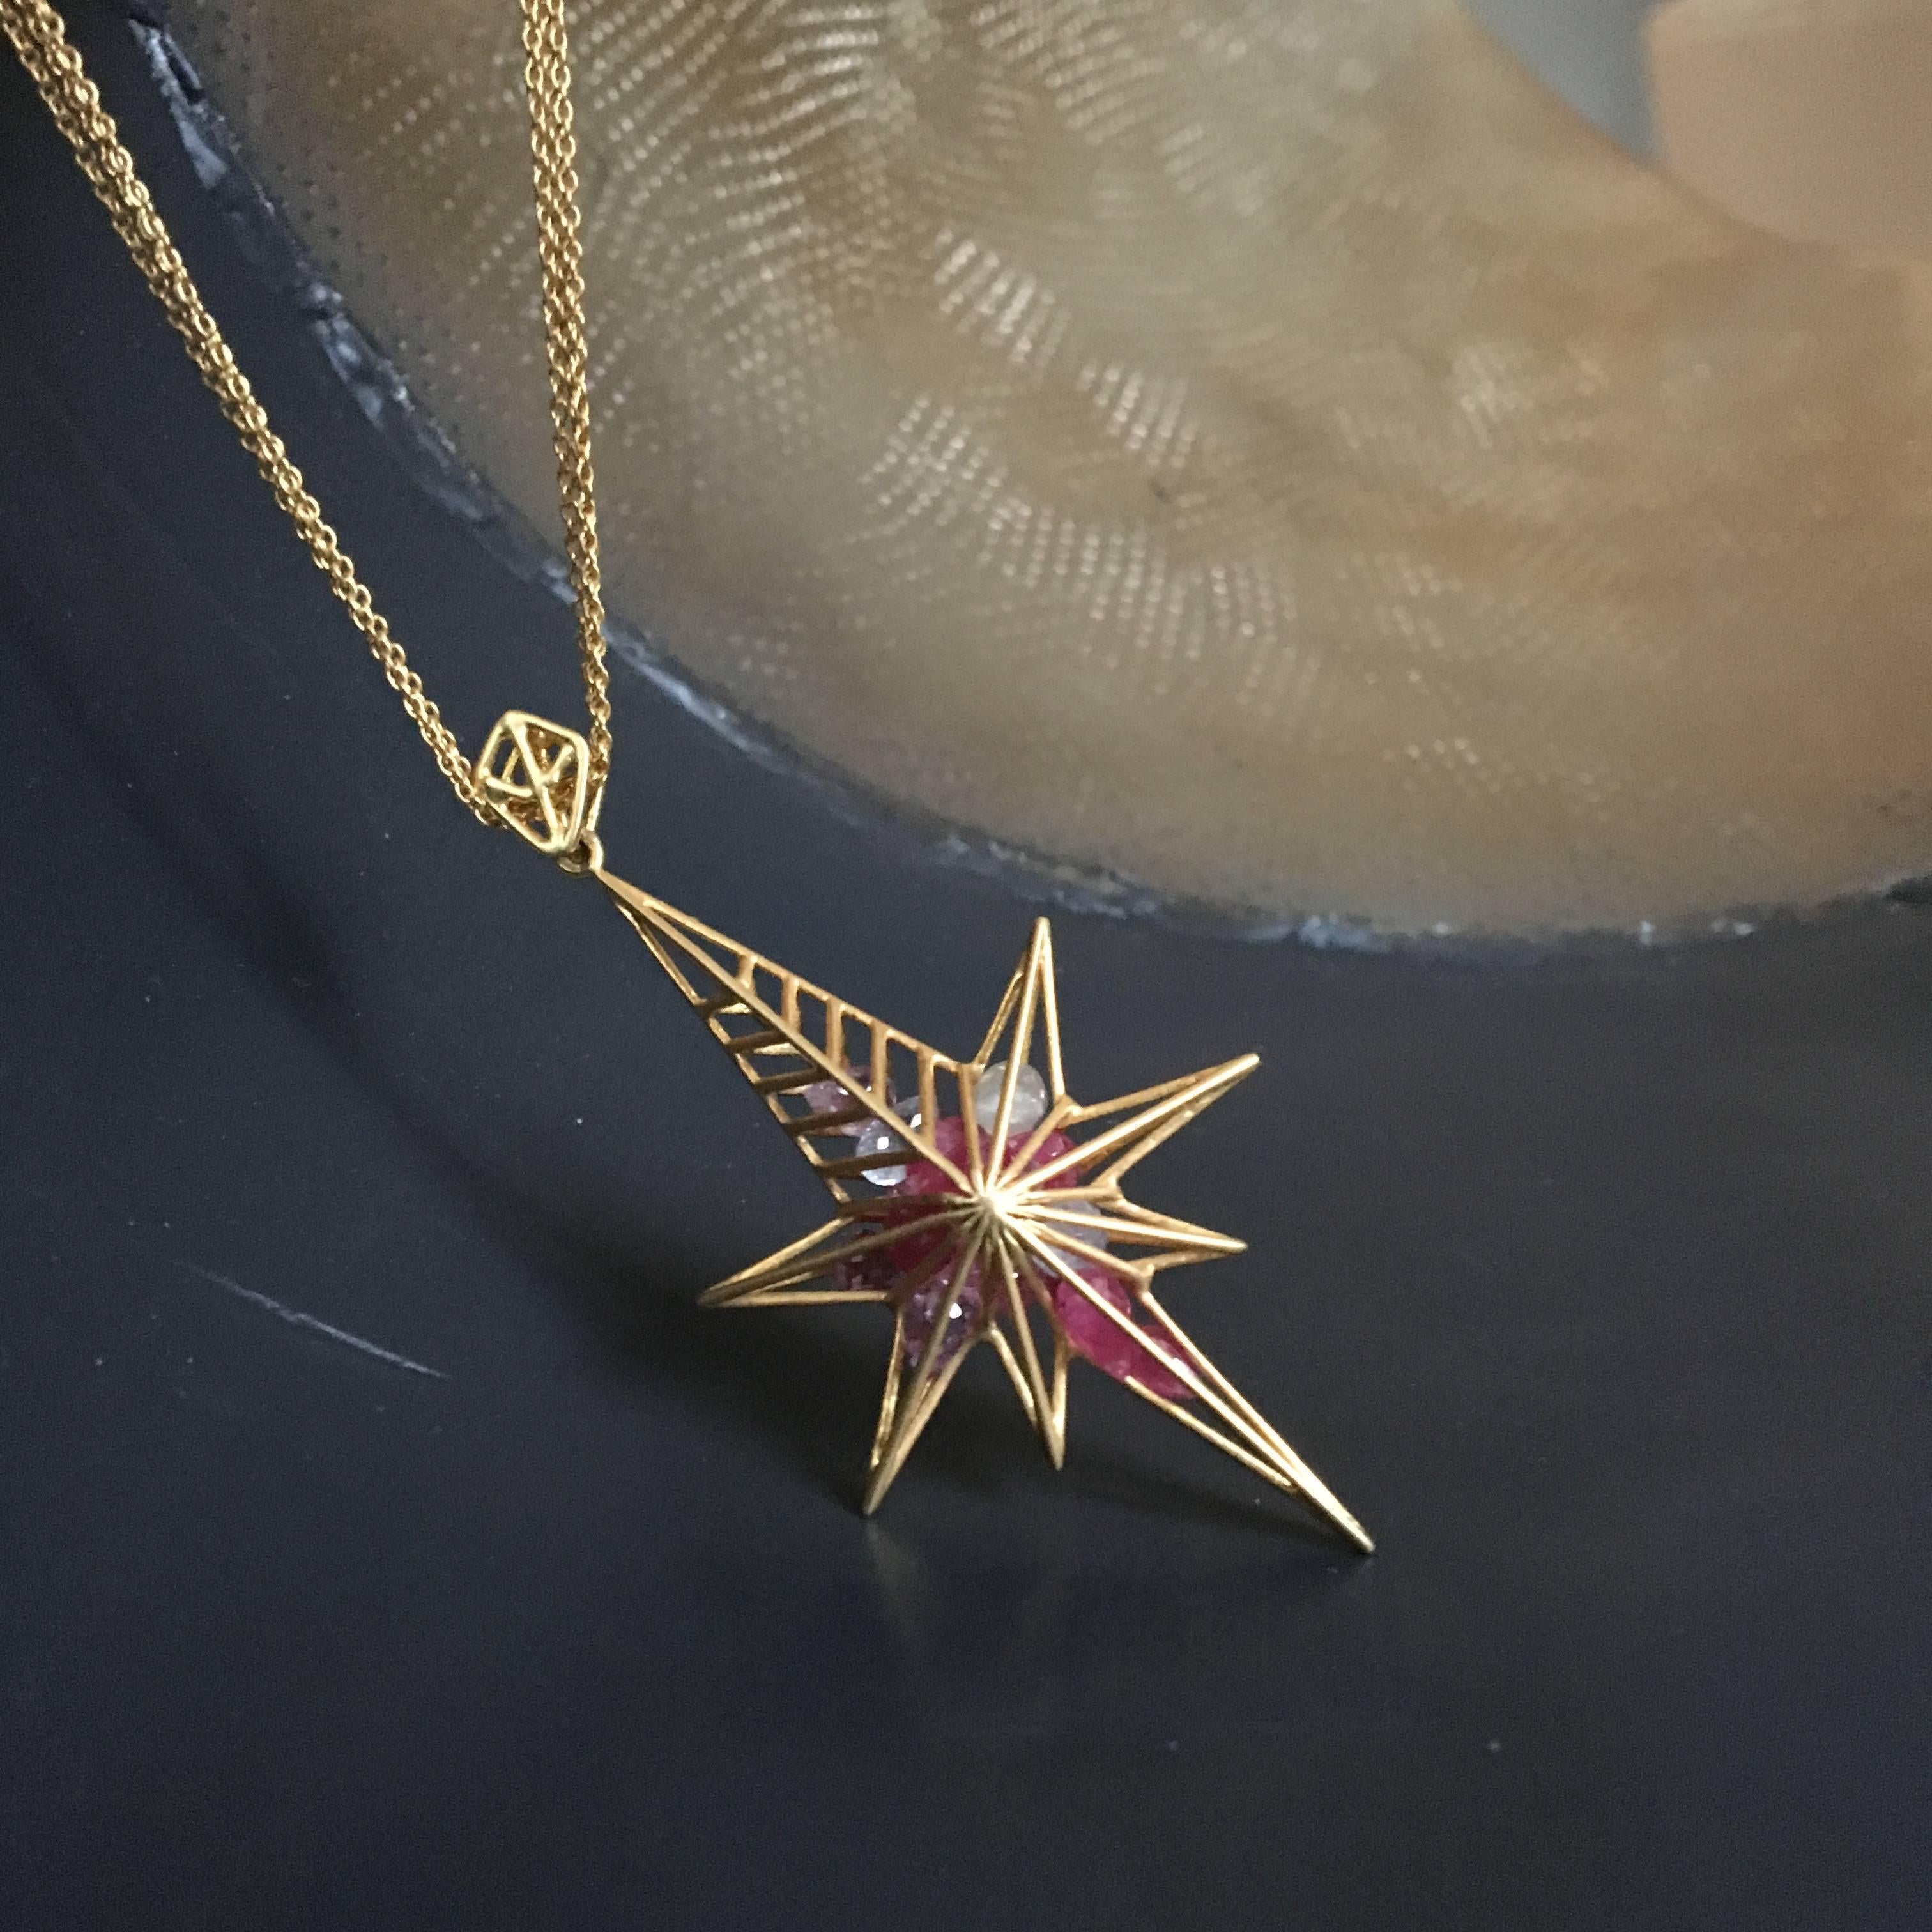 Loose pink and white sapphires are held inside this beautiful 18kt yellow Gold Star pendant cage, making a feminine and unique statement.  Finished in Lauren Harper's signature matte gold, this pendant is great for day or night wear, and will be